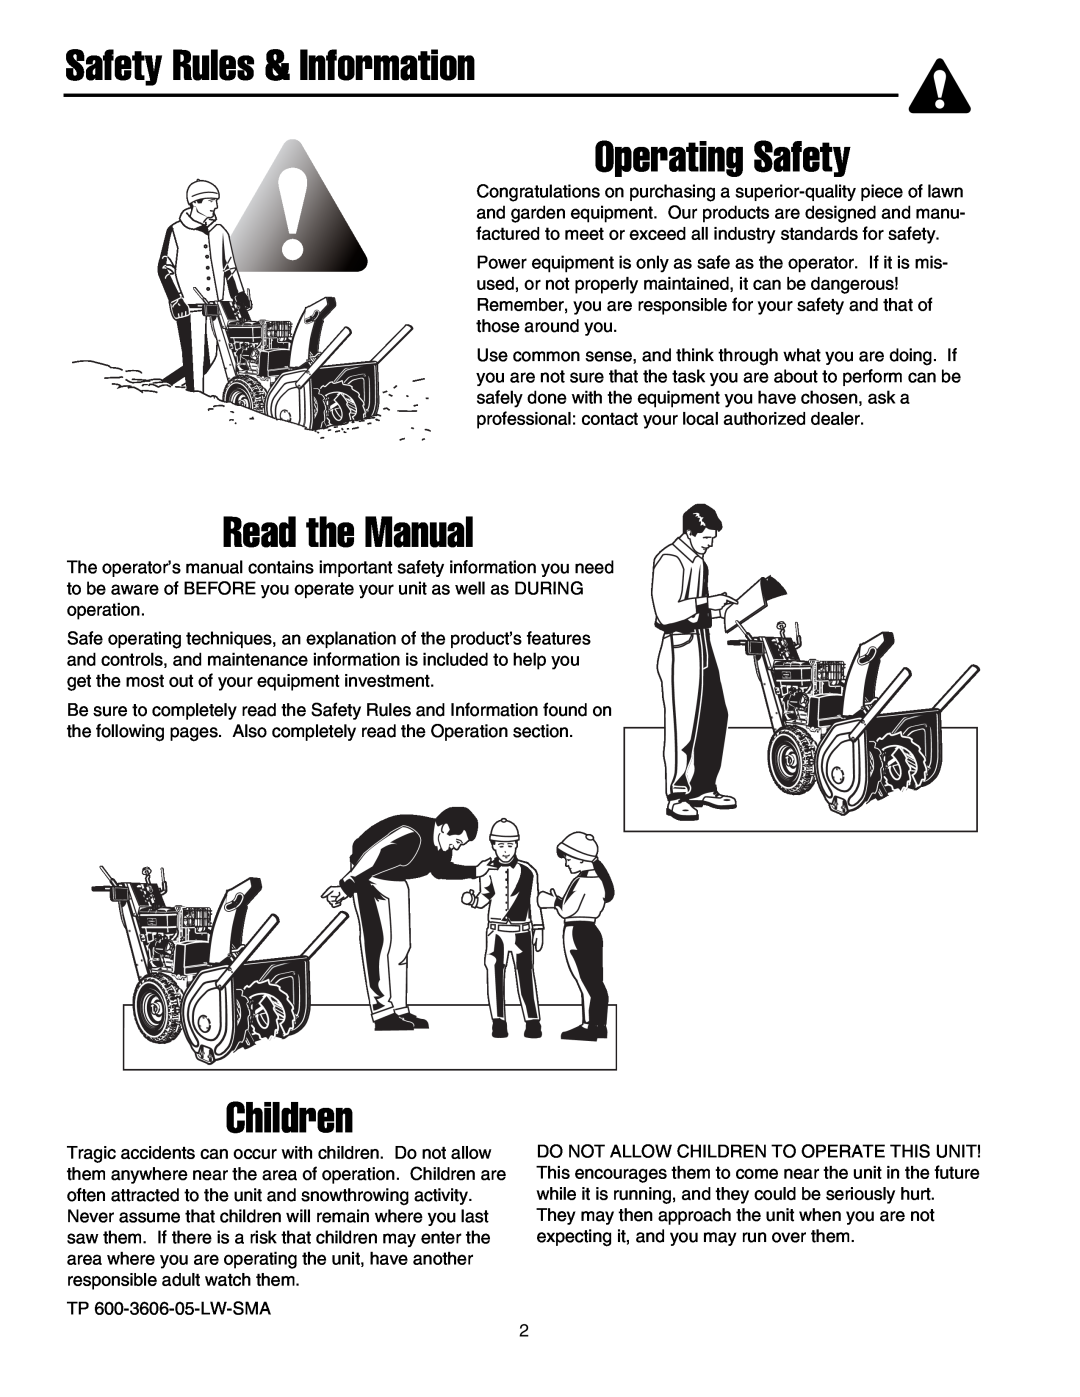 Snapper 8526, 9528, 10530, 11532 manual Safety Rules & Information Operating Safety, Read the Manual, Children 